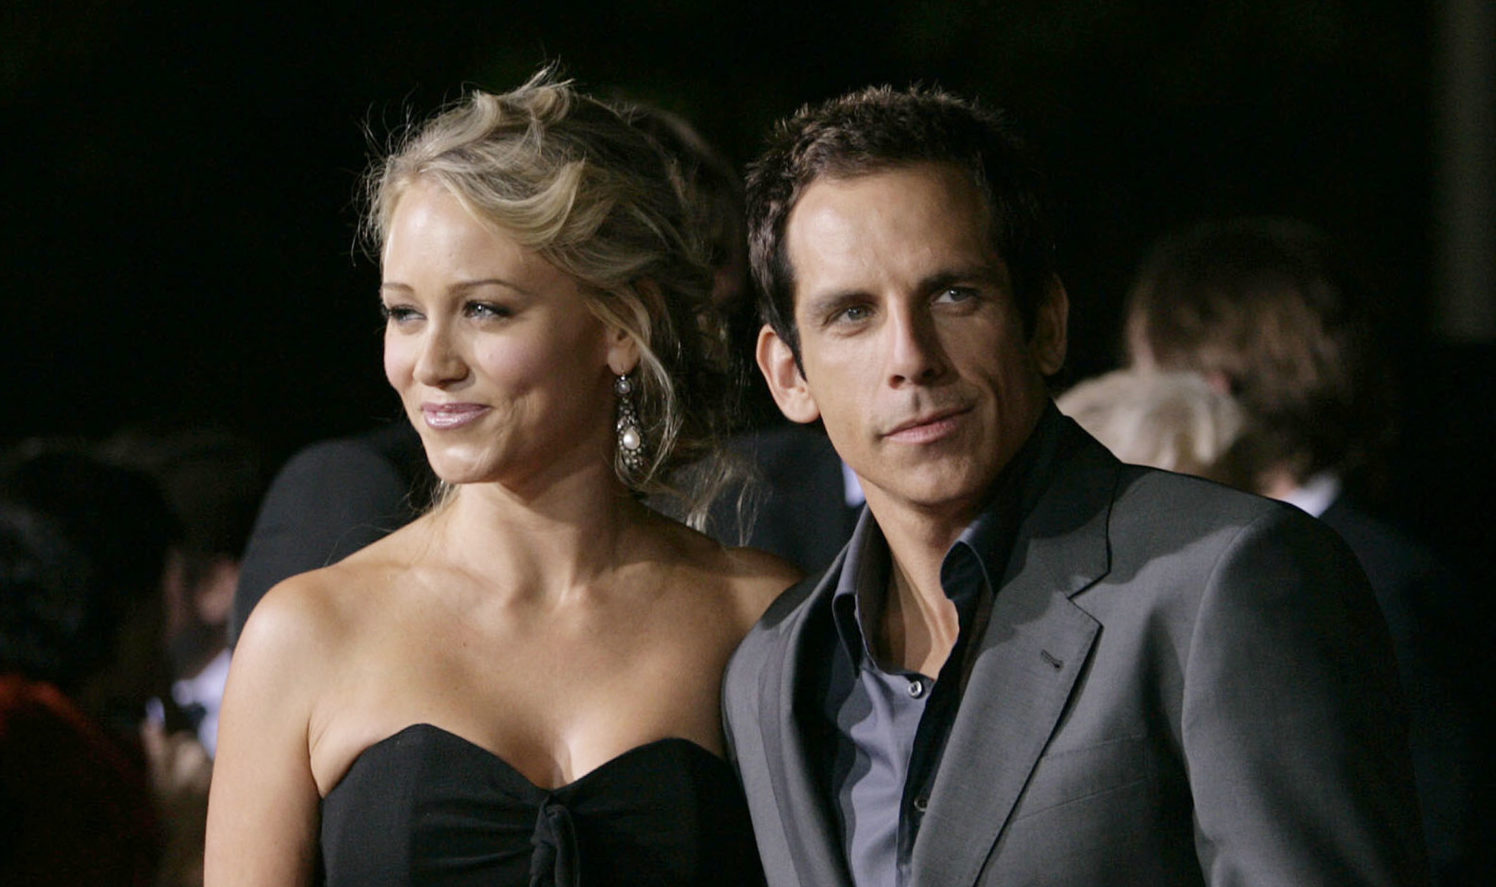 Ben Stiller, right, and Christine Taylor arrive at the premiere of "The Heartbreak Kid" in Los Angeles on Thursday, Sept. 27, 2007. (AP Photo/Matt Sayles)